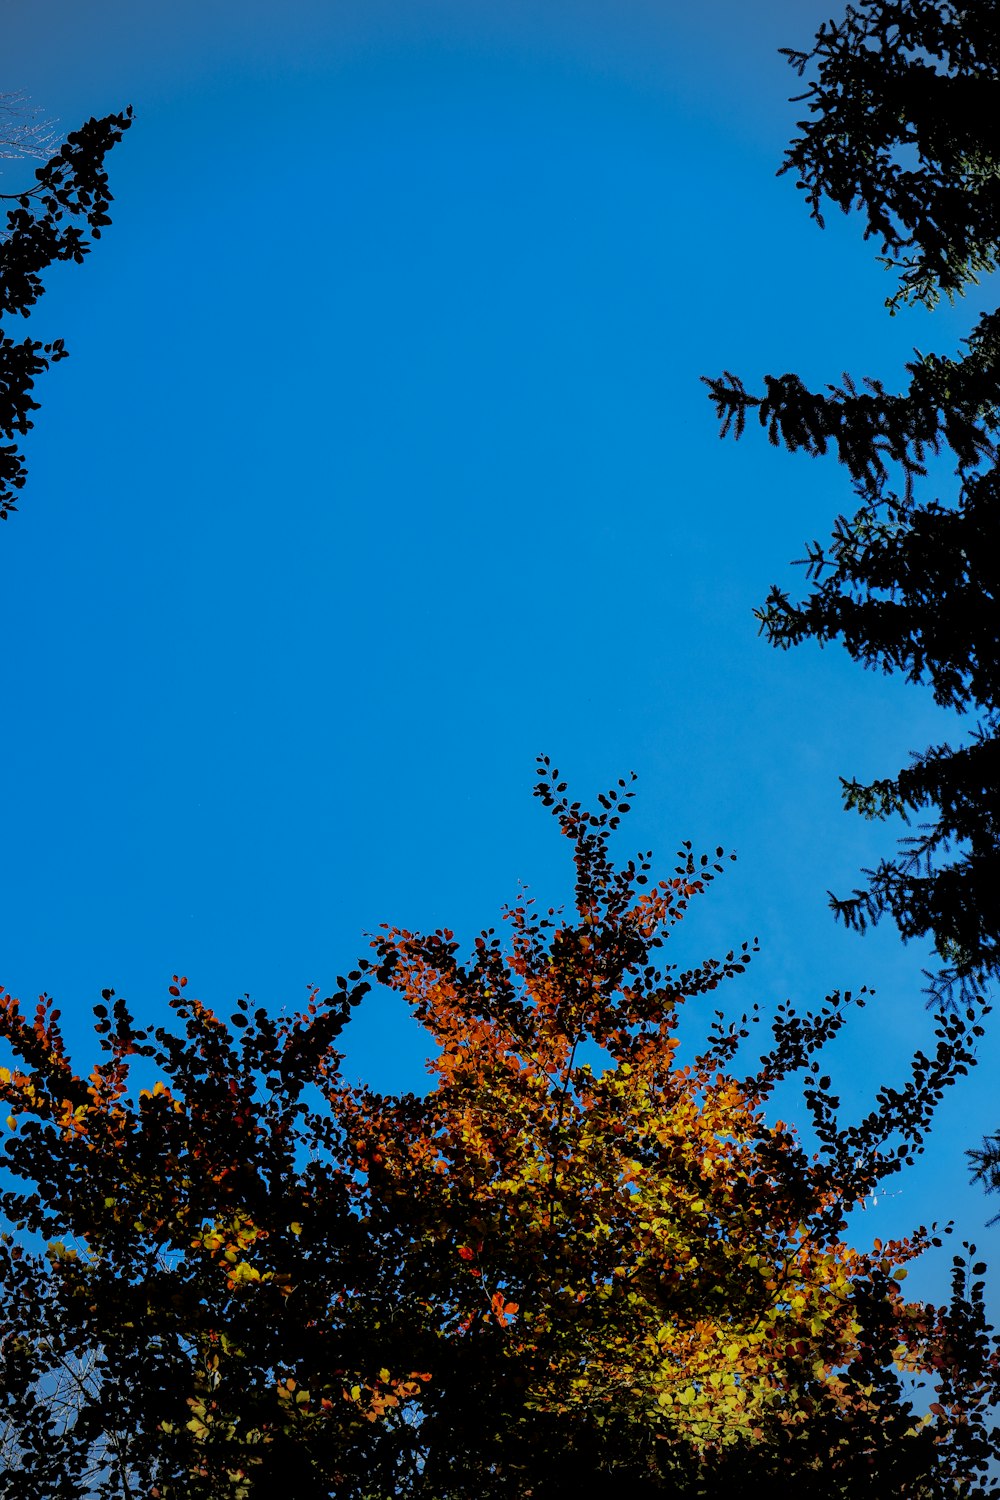 a blue sky with some trees in the foreground